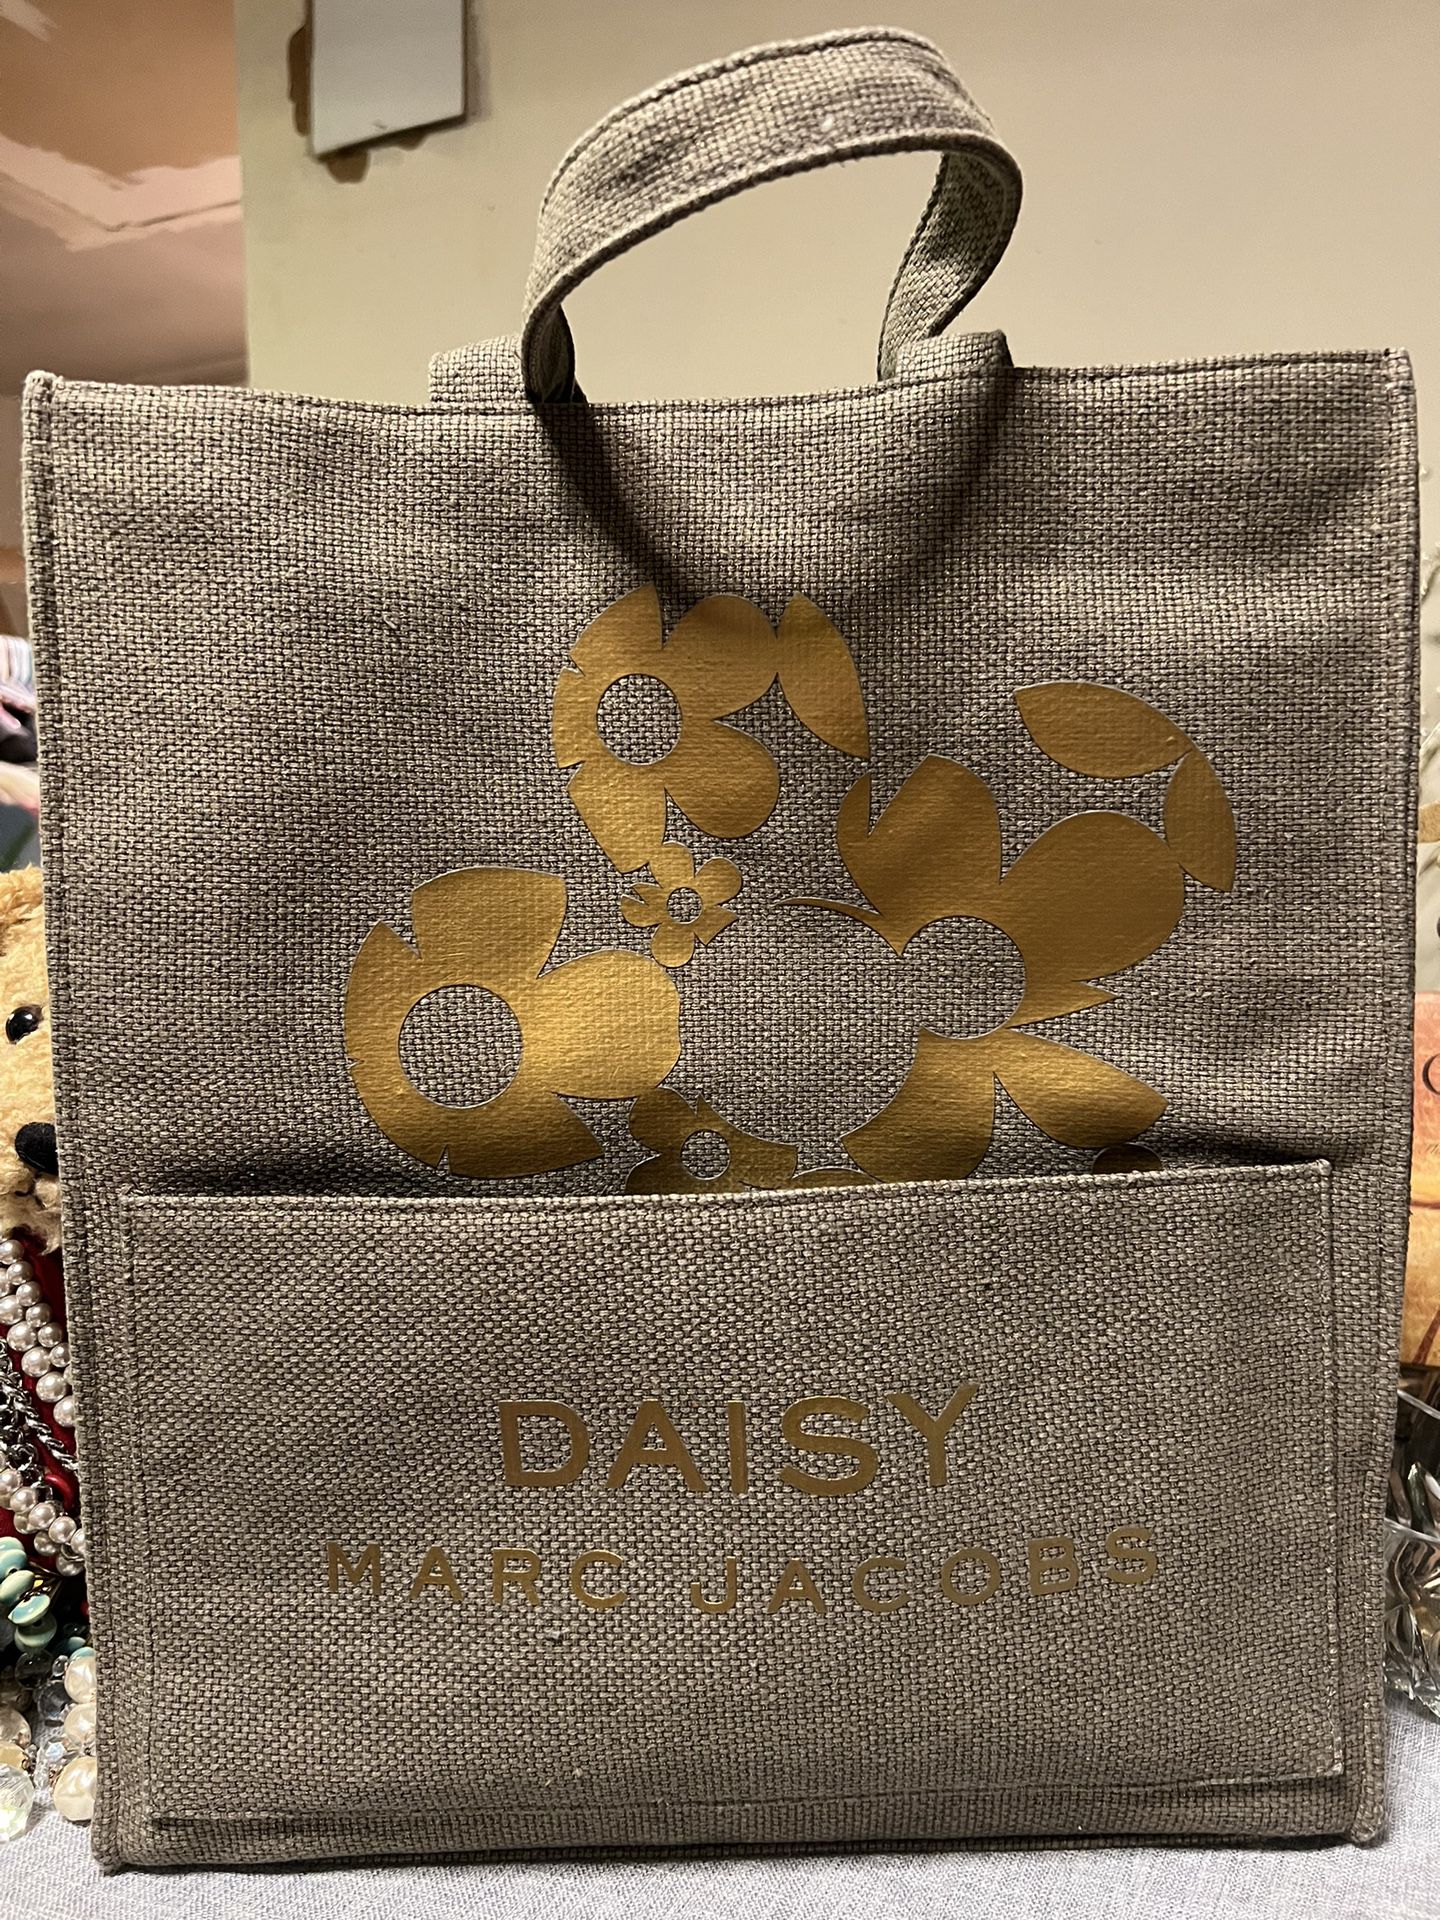 NWOT Marc Jacobs Daisy Tote 